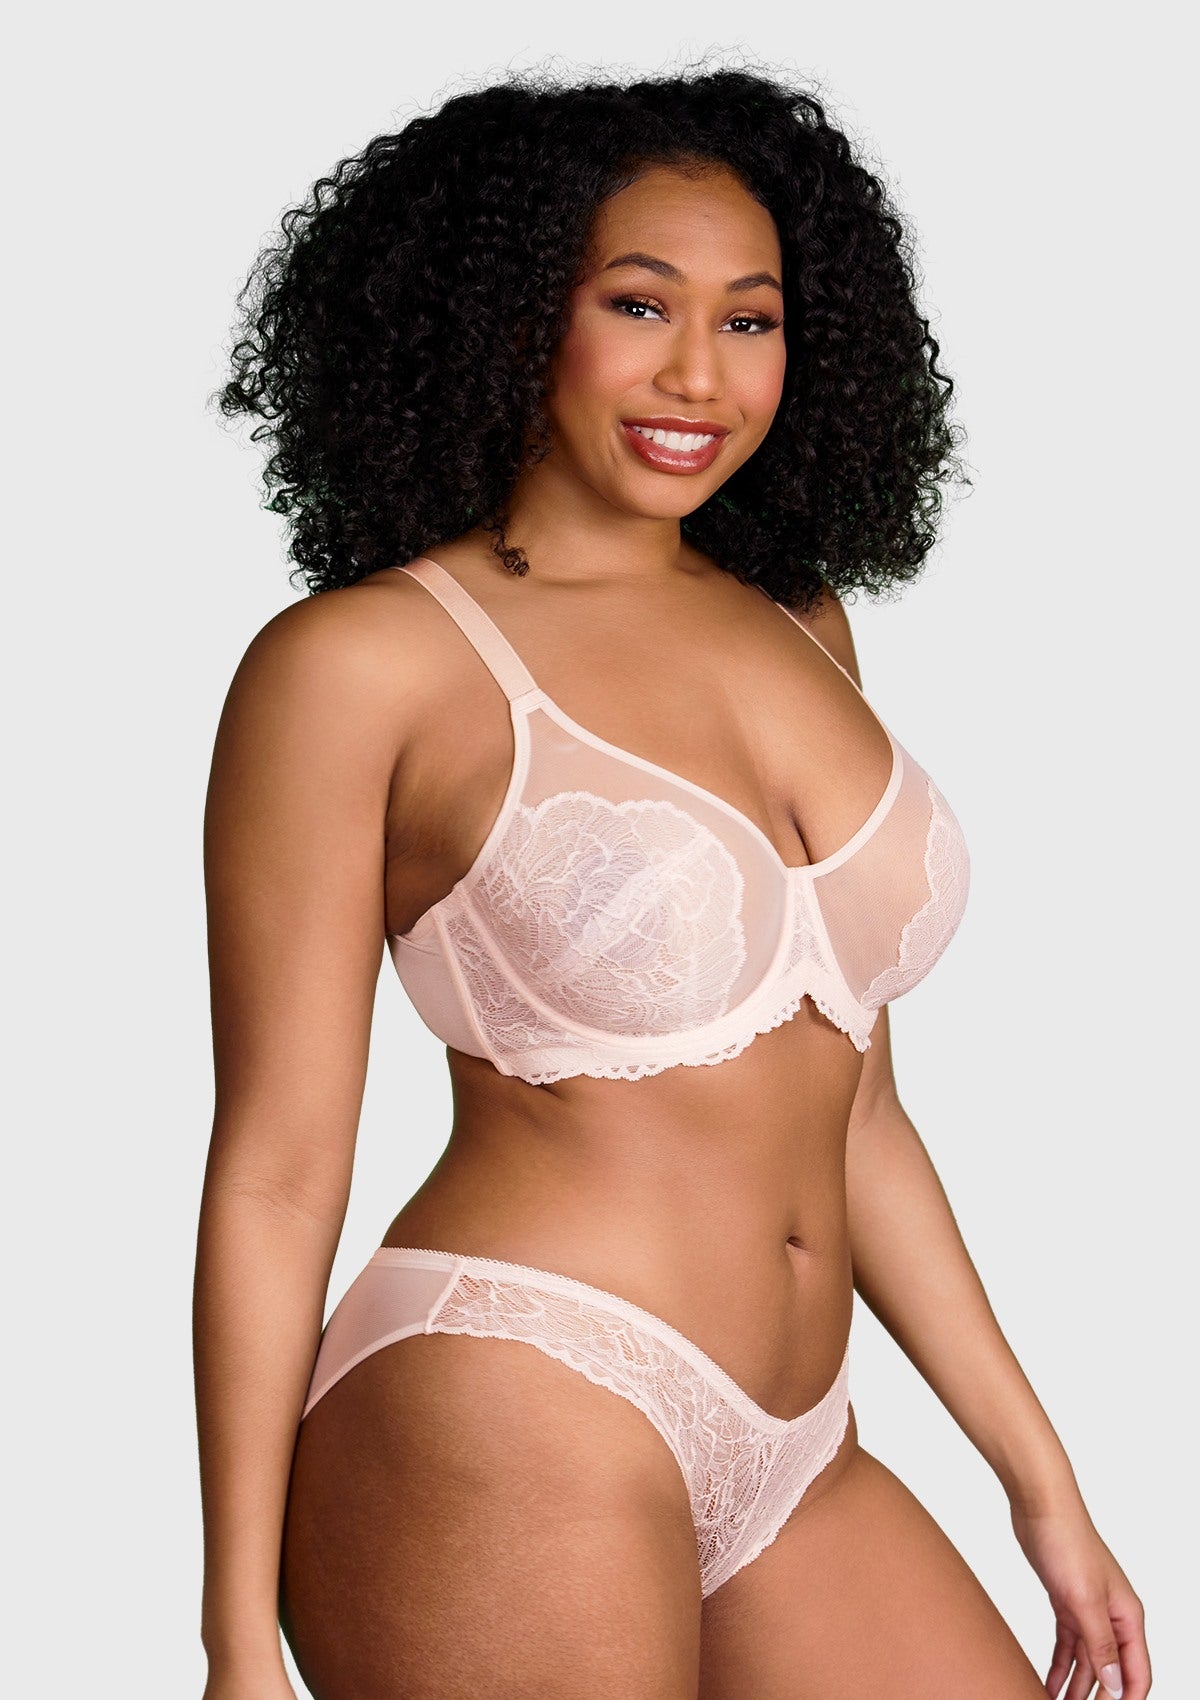 HSIA Blossom Sheer Lace Bra: Comfortable Underwire Bra For Big Busts - Dusty Peach / 38 / H